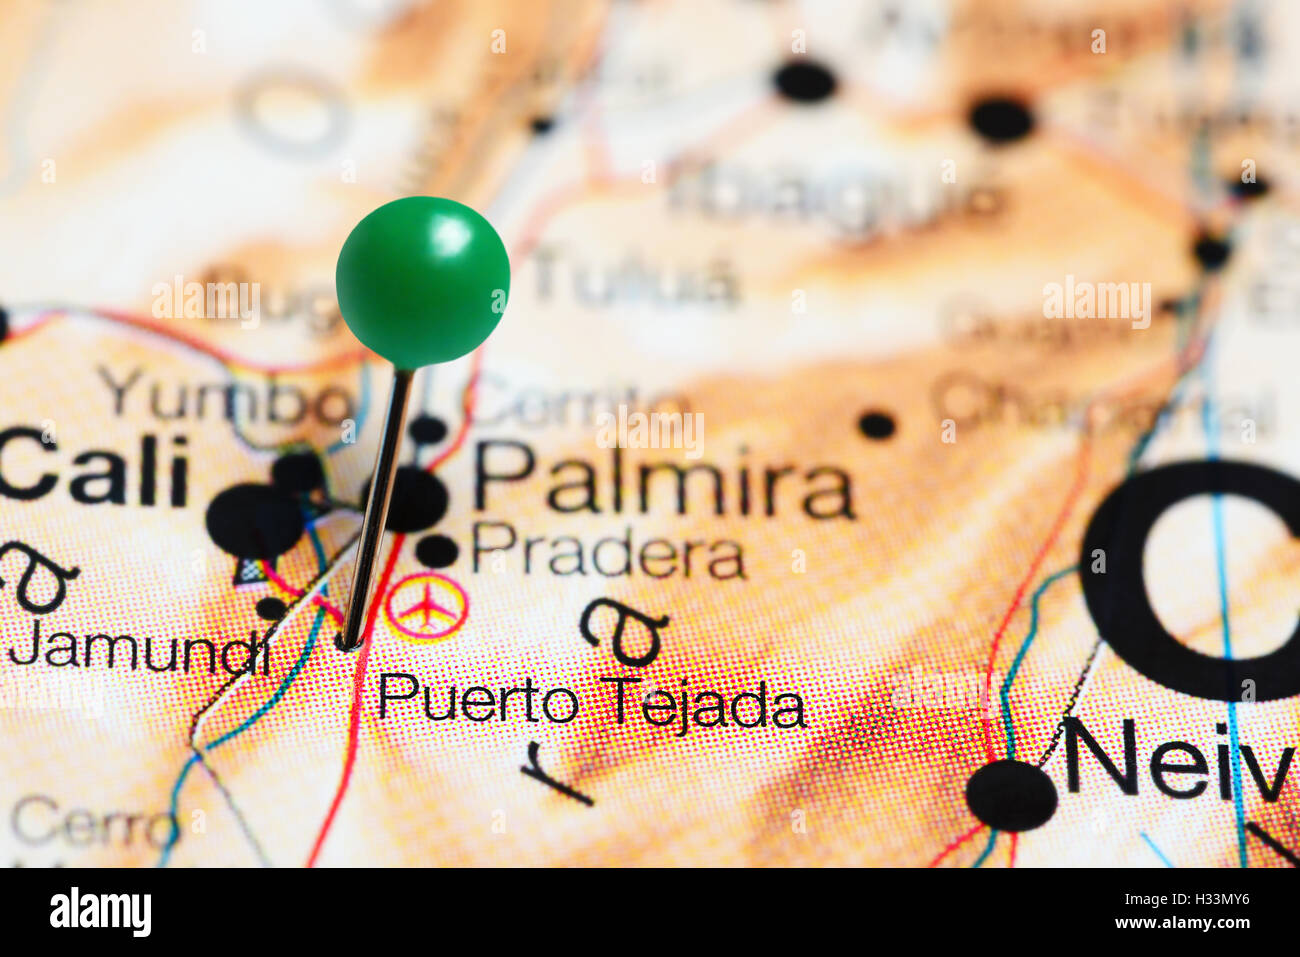 Puerto Tejada pinned on a map of Colombia Stock Photo